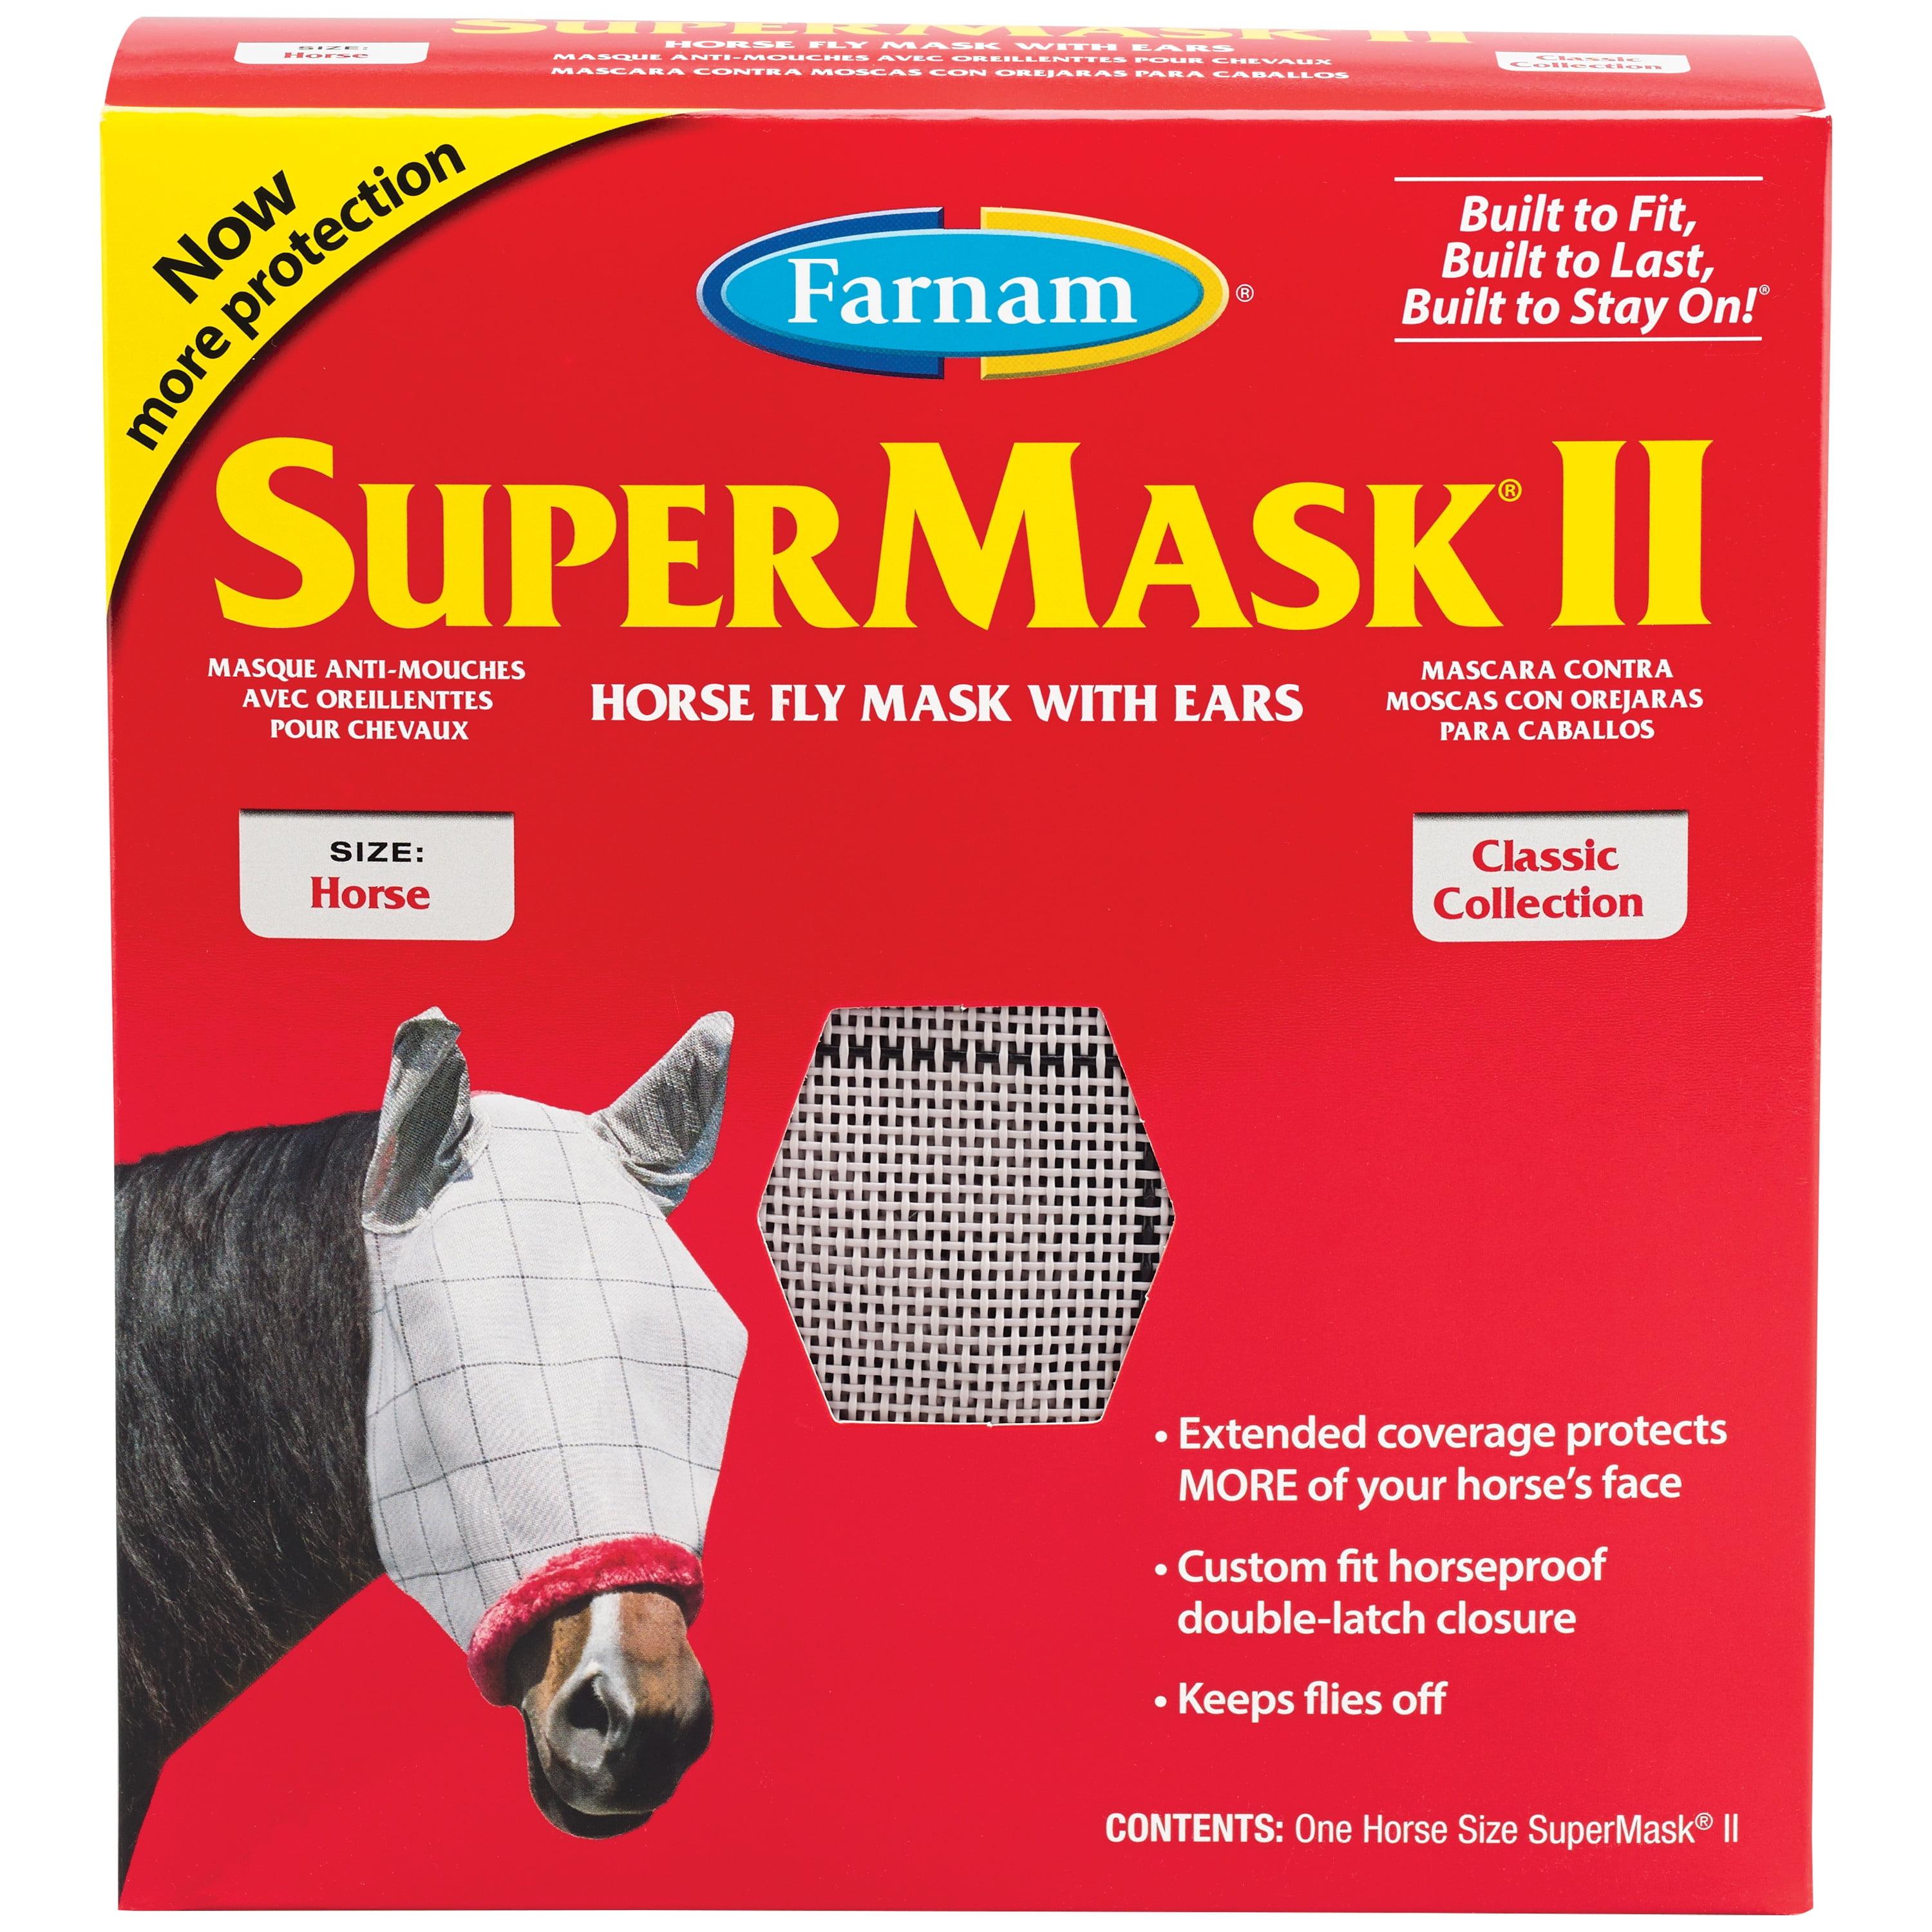 Farnam SuperMask II Horse Fly Mask with Ears